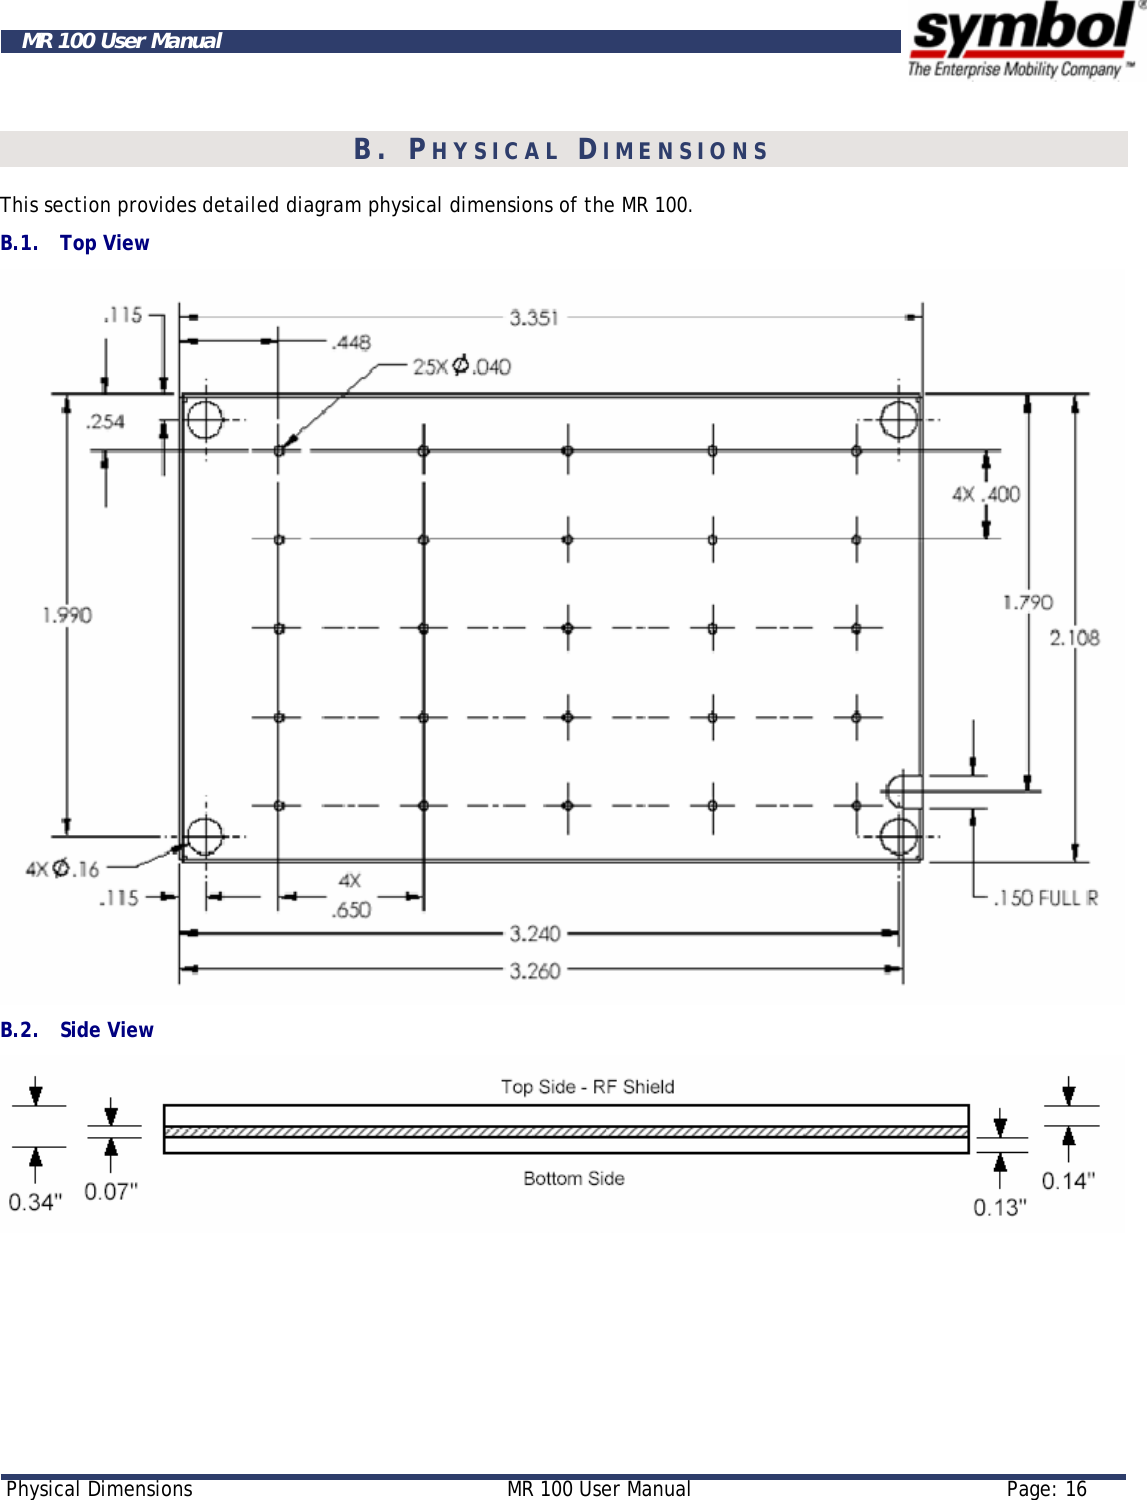     Physical Dimensions  MR 100 User Manual  Page: 16  MR 100 User Manual B. PHYSICAL DIMENSIONS This section provides detailed diagram physical dimensions of the MR 100.  B.1. Top View  B.2. Side View      